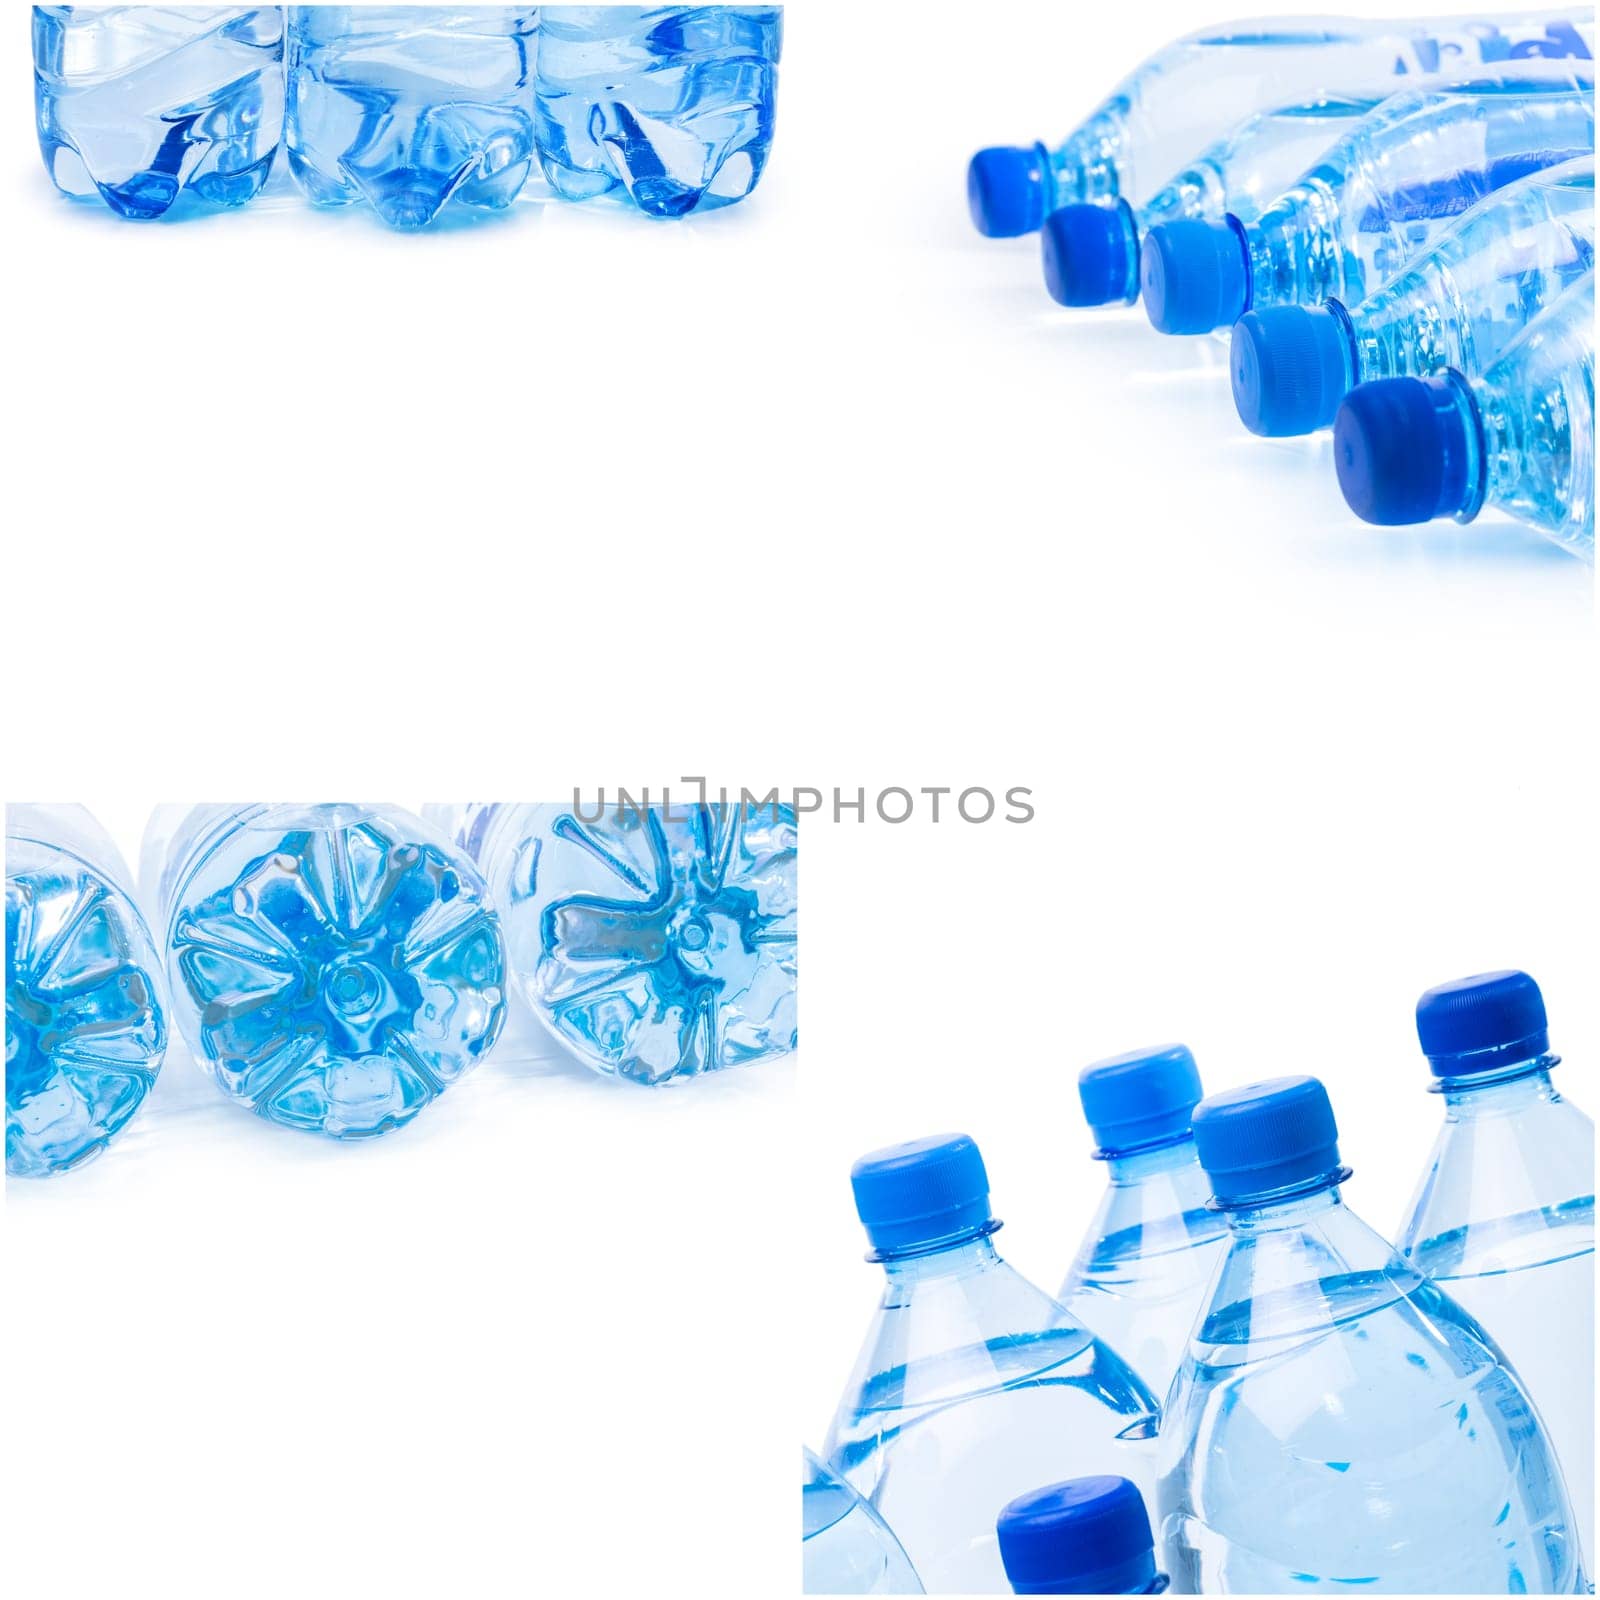 plastic bottles of water on white background by Fabrikasimf